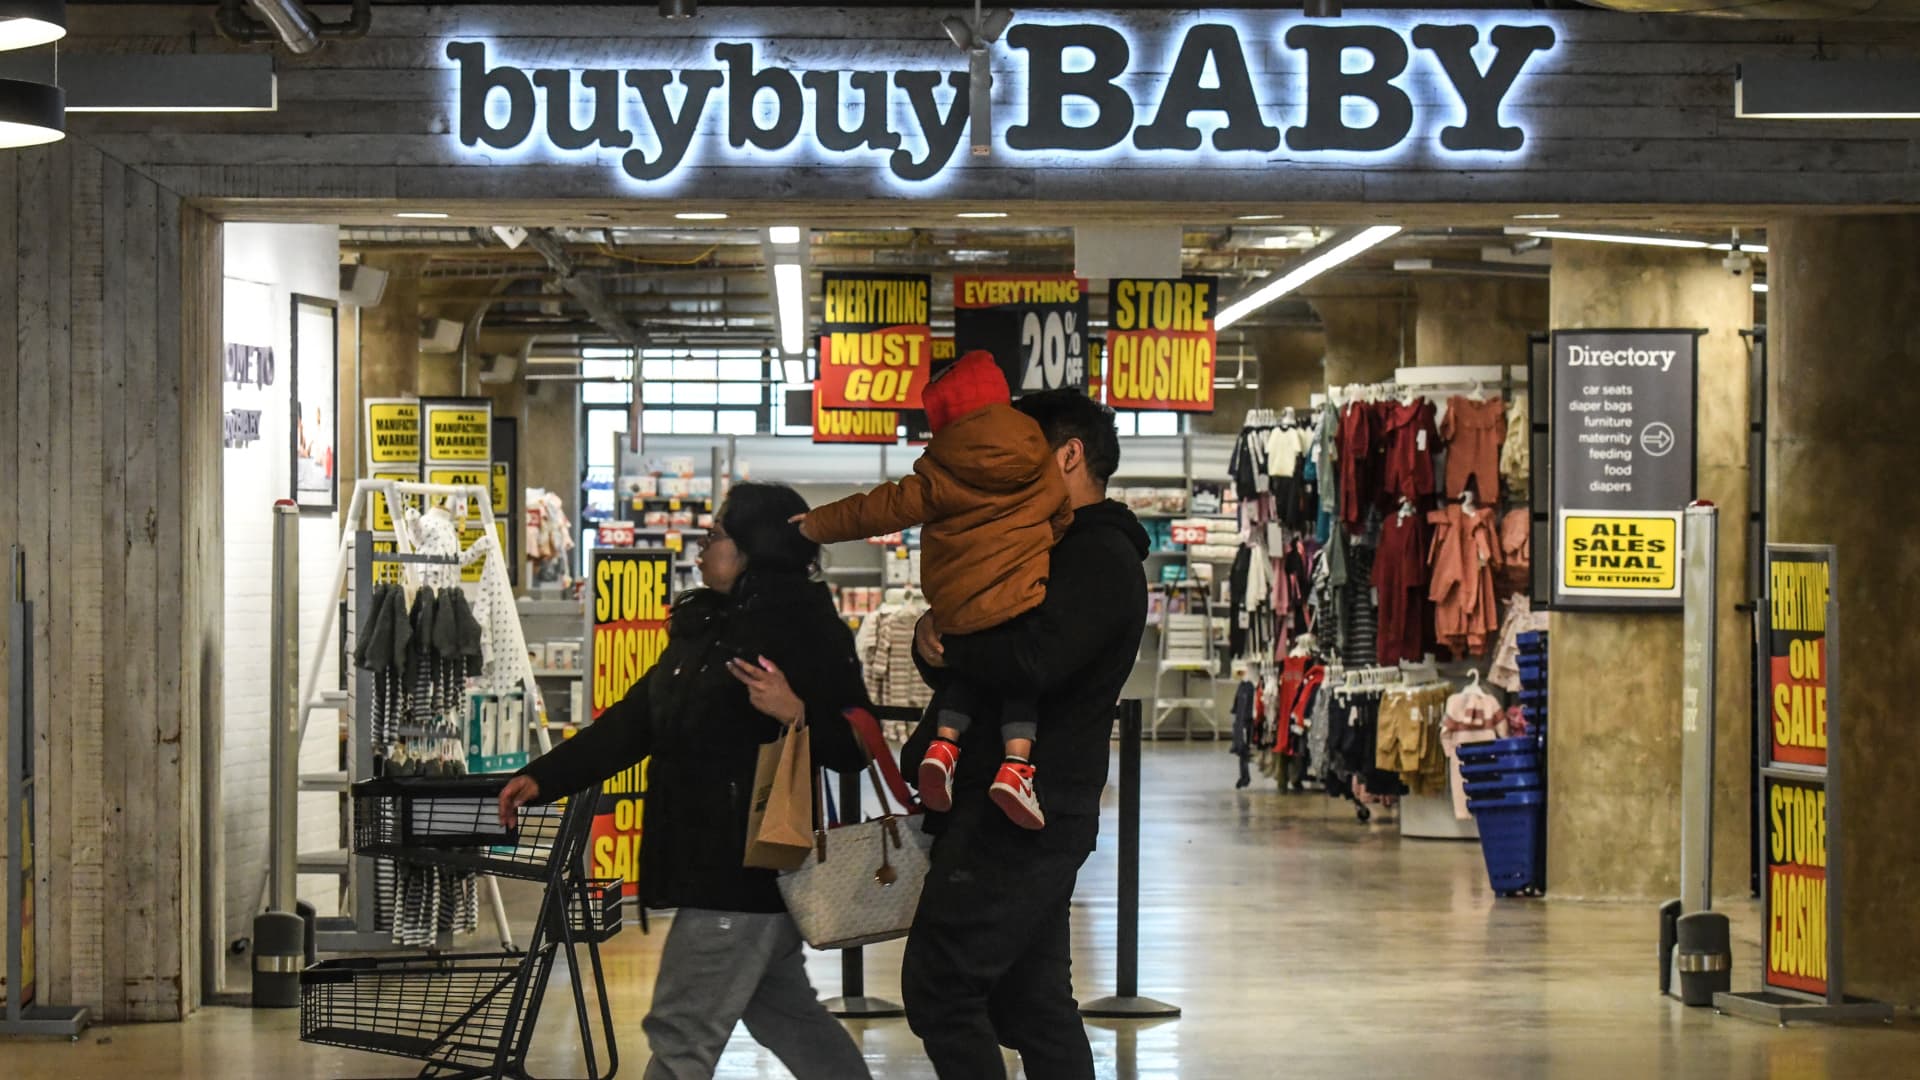 Buy Buy Baby draws sale interest in Bed Bath & Beyond bankruptcy, one bidder looks to save stores